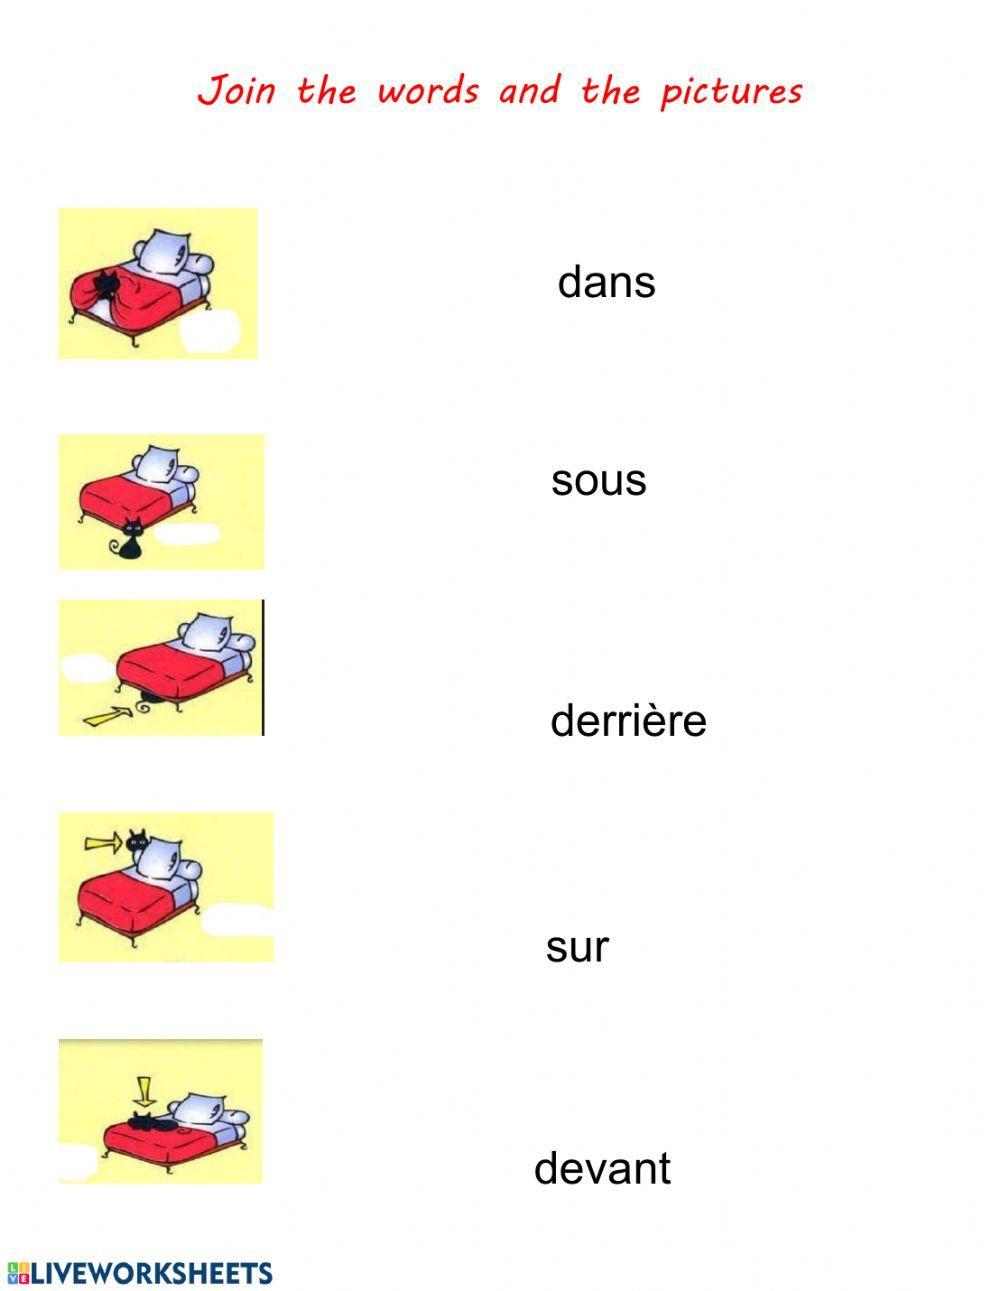 What is the difference in French between : devant - derrière